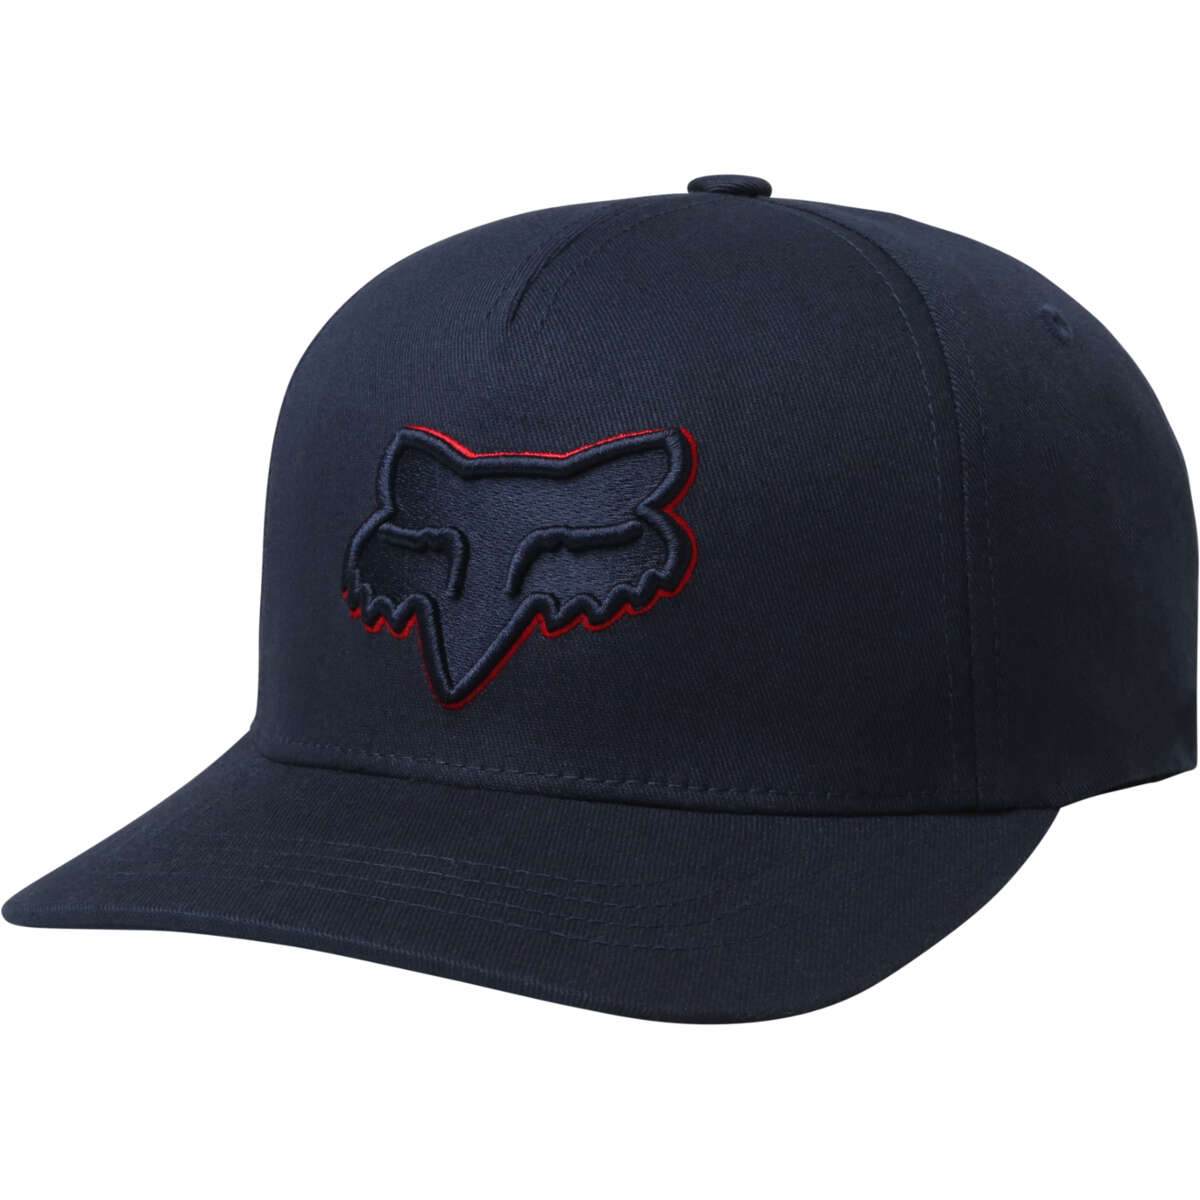 Fox Enfant Casquette Snapback Epicycle Midnight